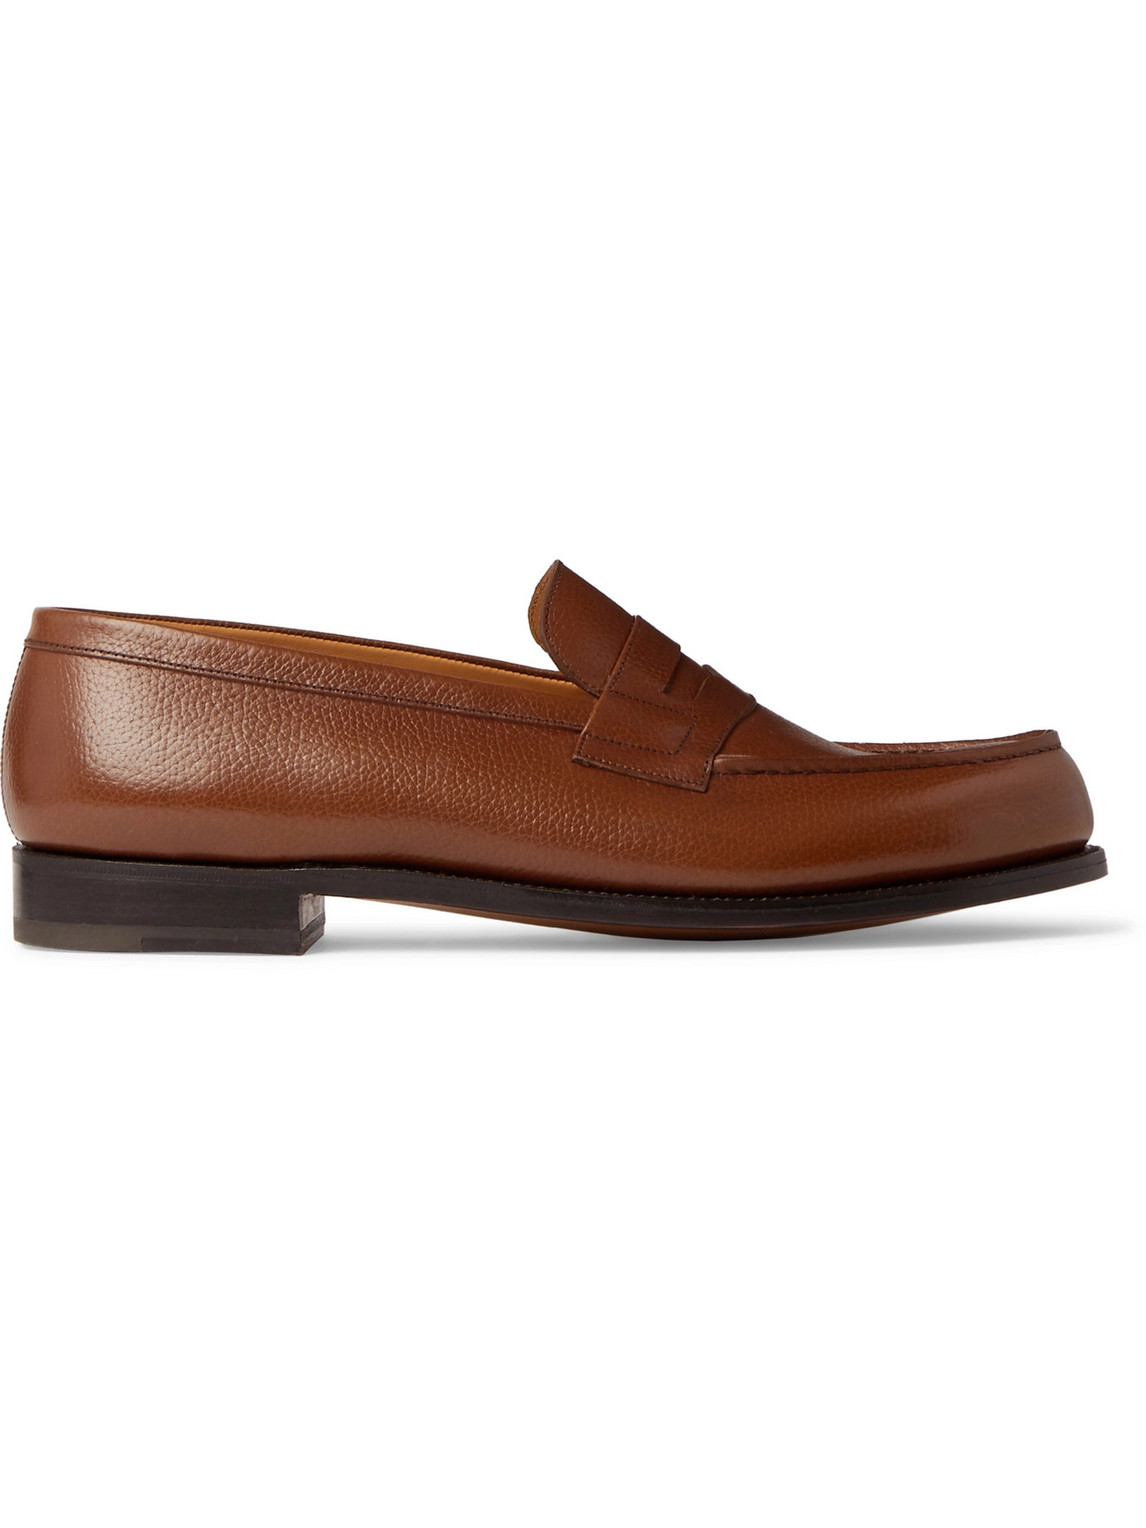 J.M. Weston 180 Moccasin Full-Grain Leather Loafers